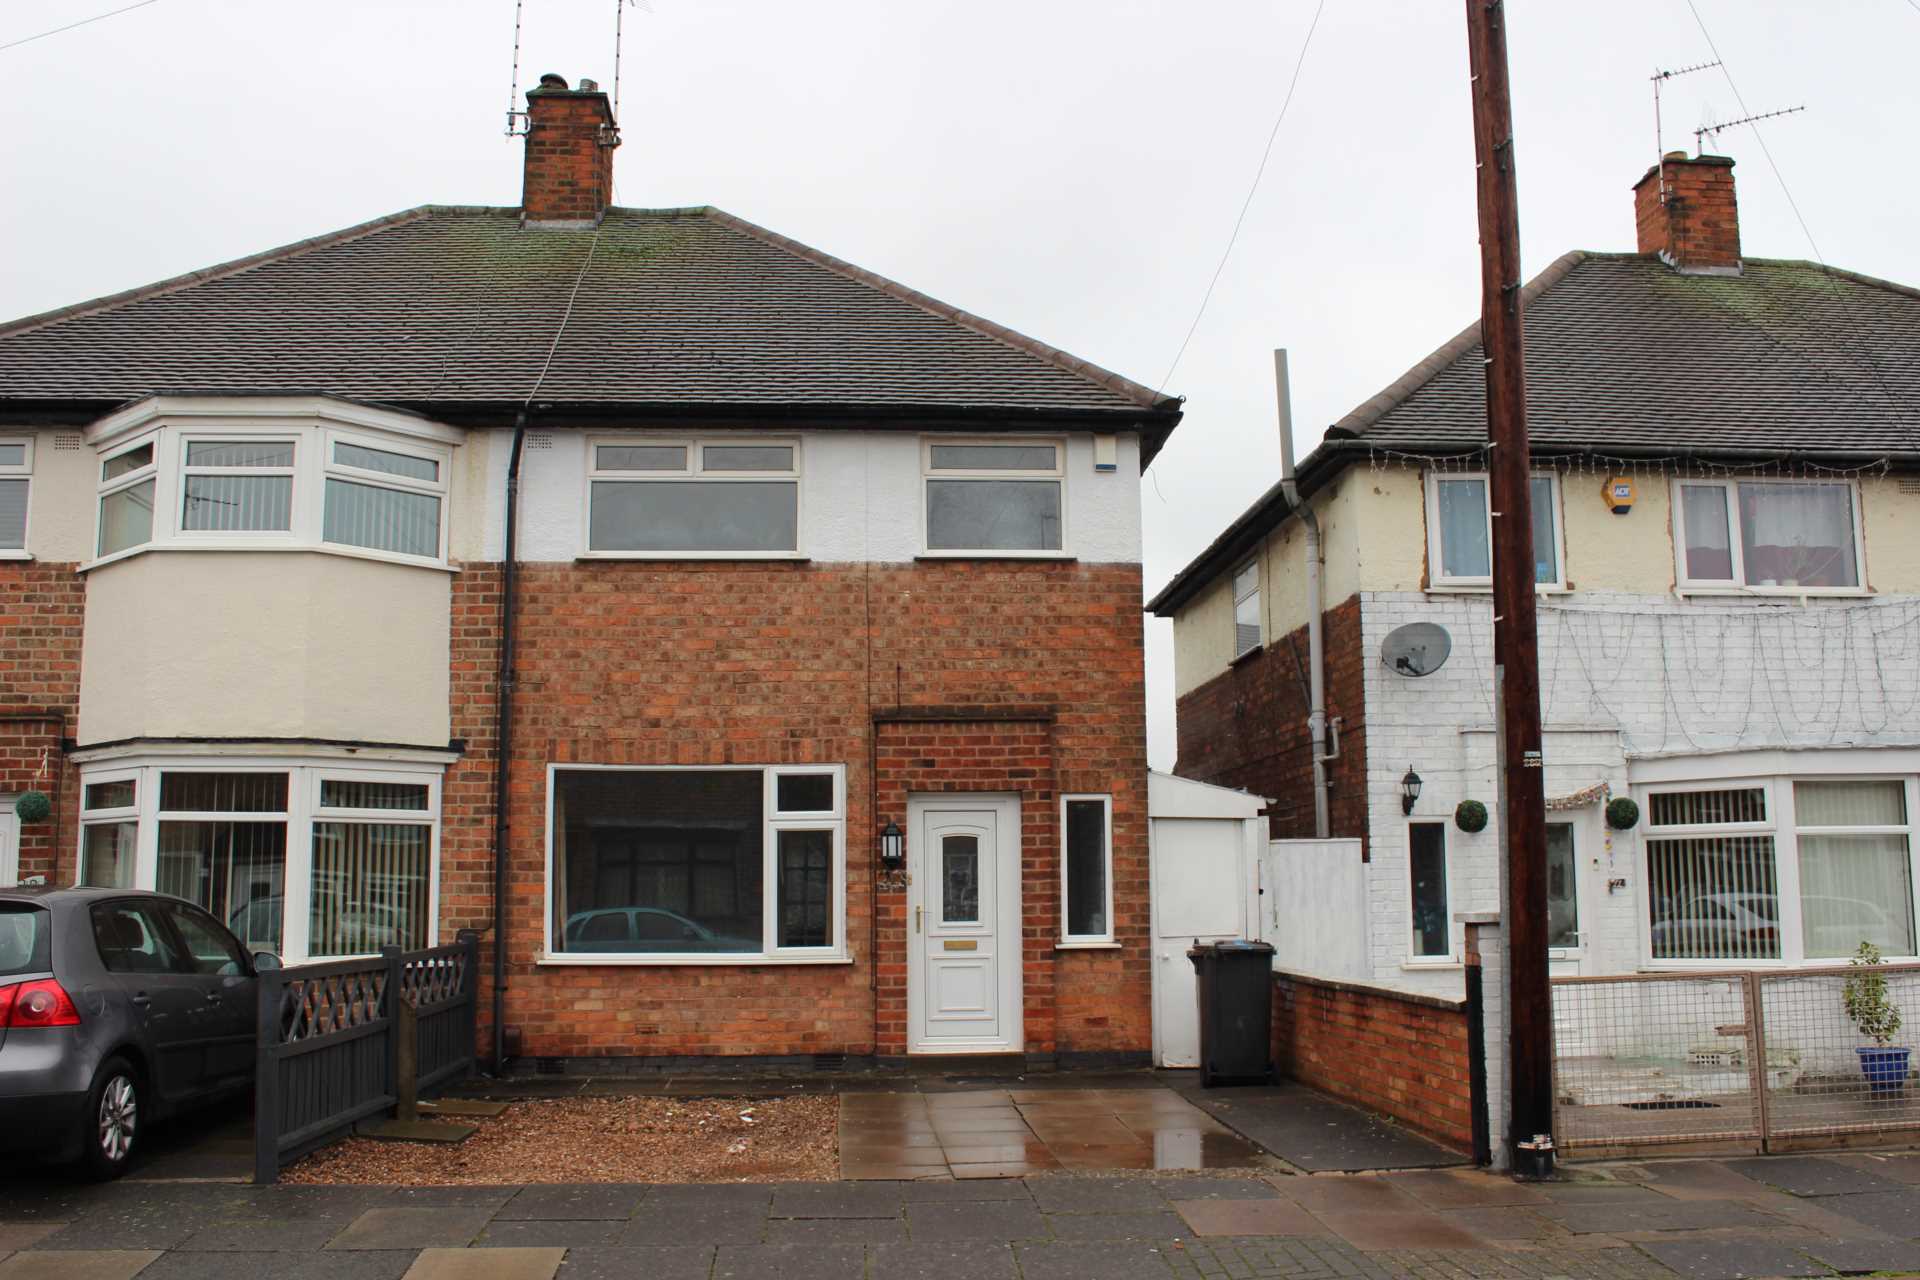 3 bed Semi-Detached House for rent in Leicester. From Charles Derby Estates - Leicester